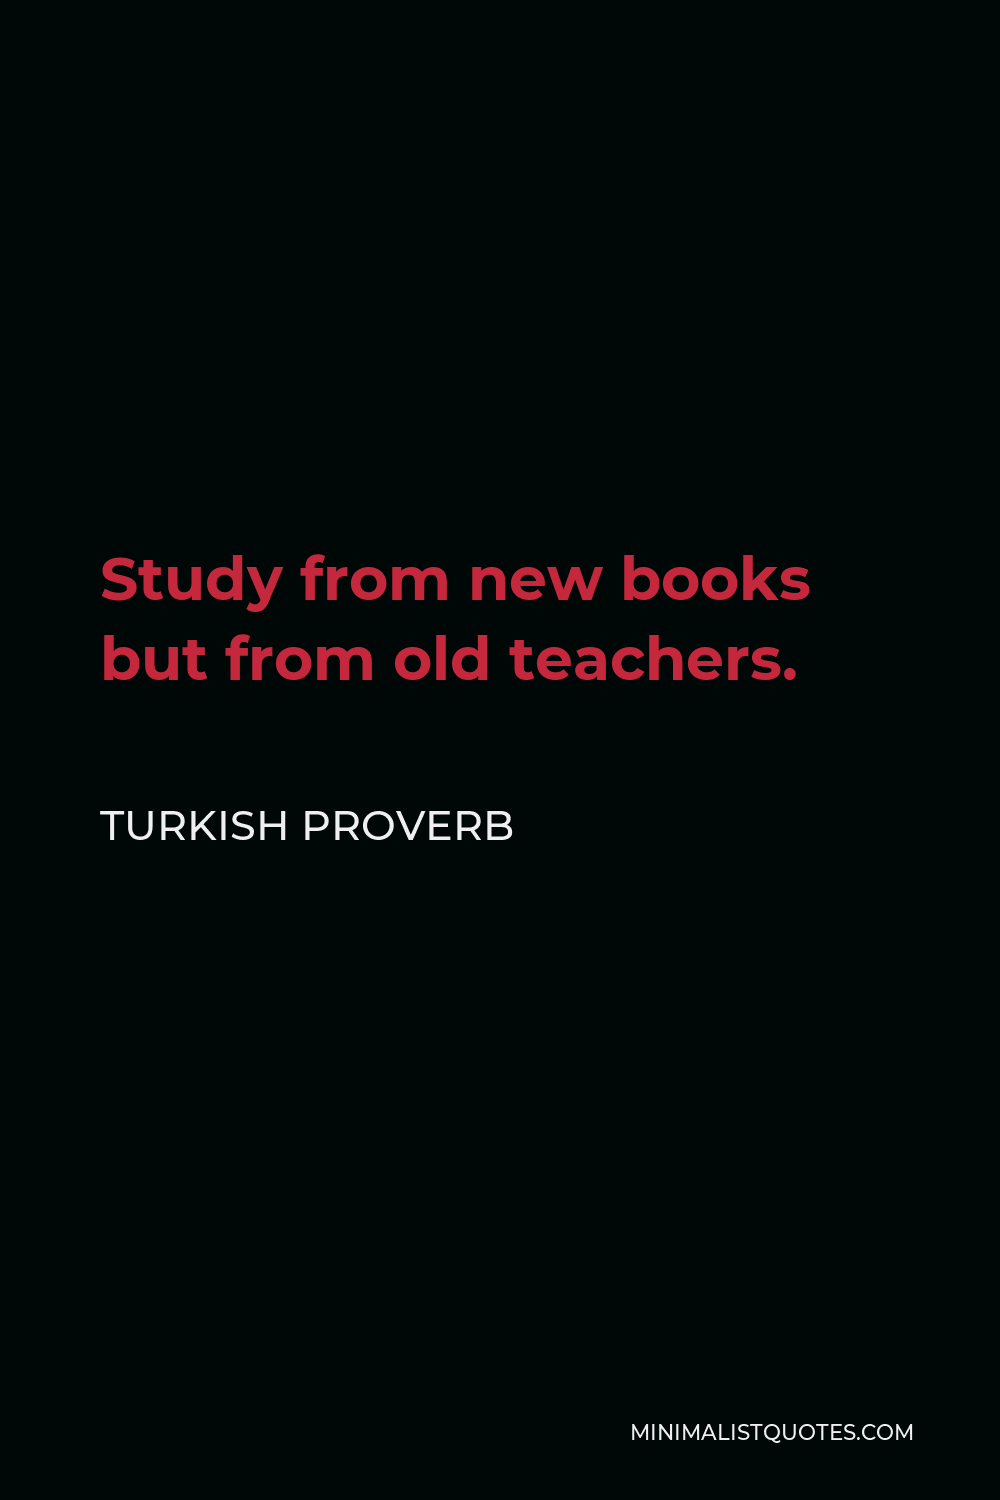 Turkish Proverb Quote - Study from new books but from old teachers